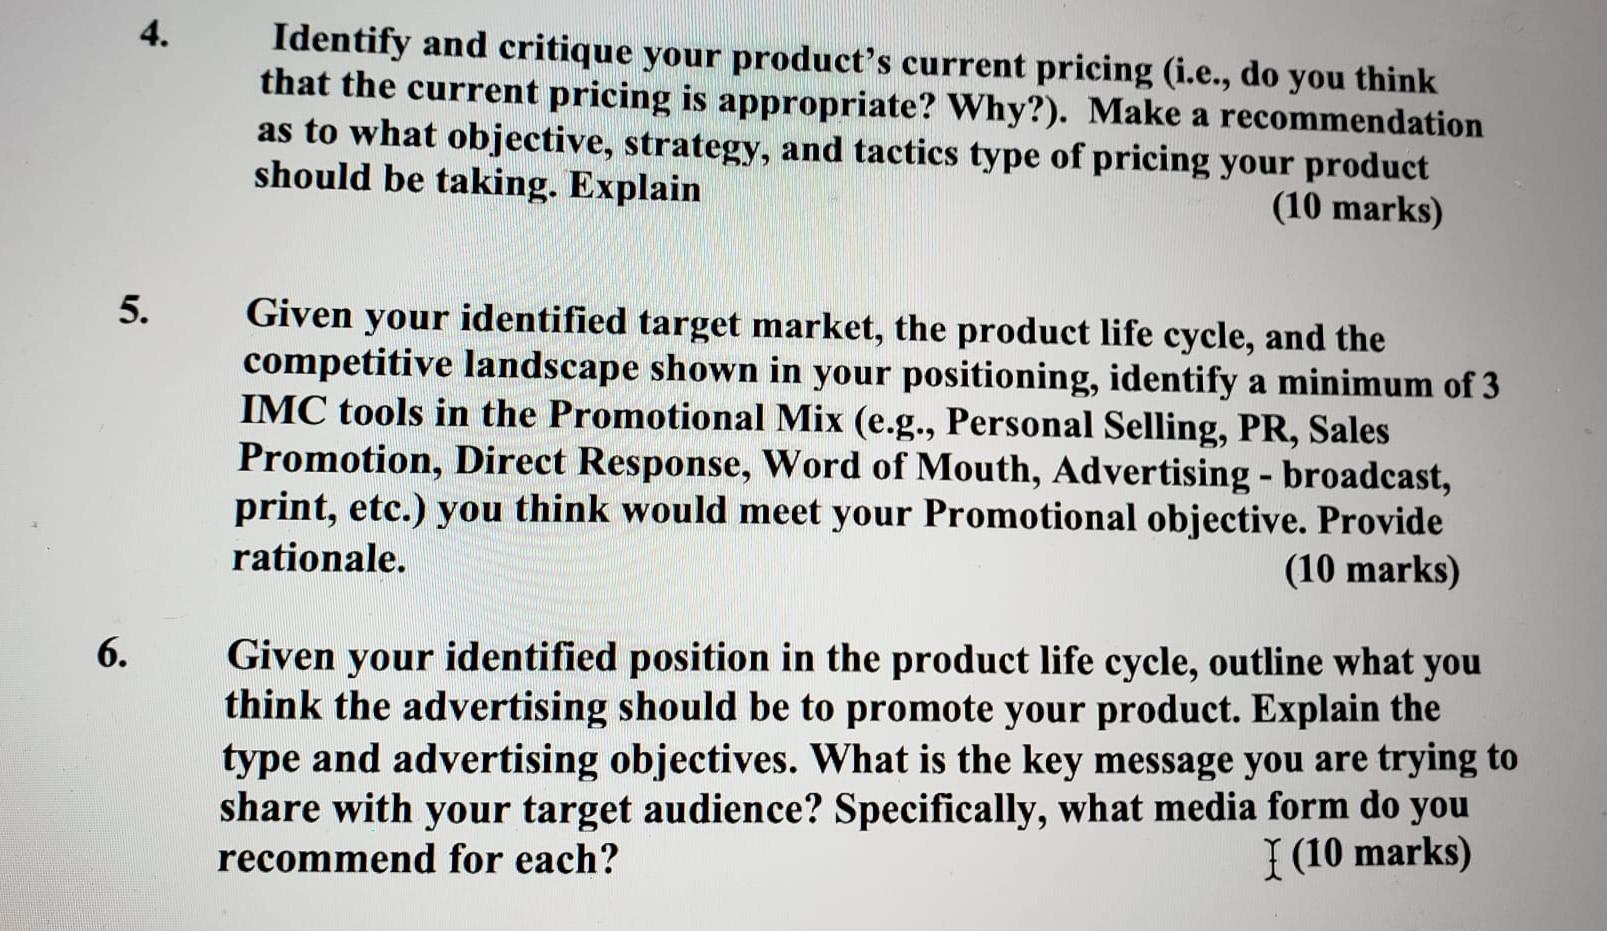 Identify and critique your product's current pricing (i.e., do you think that the current pricing is...